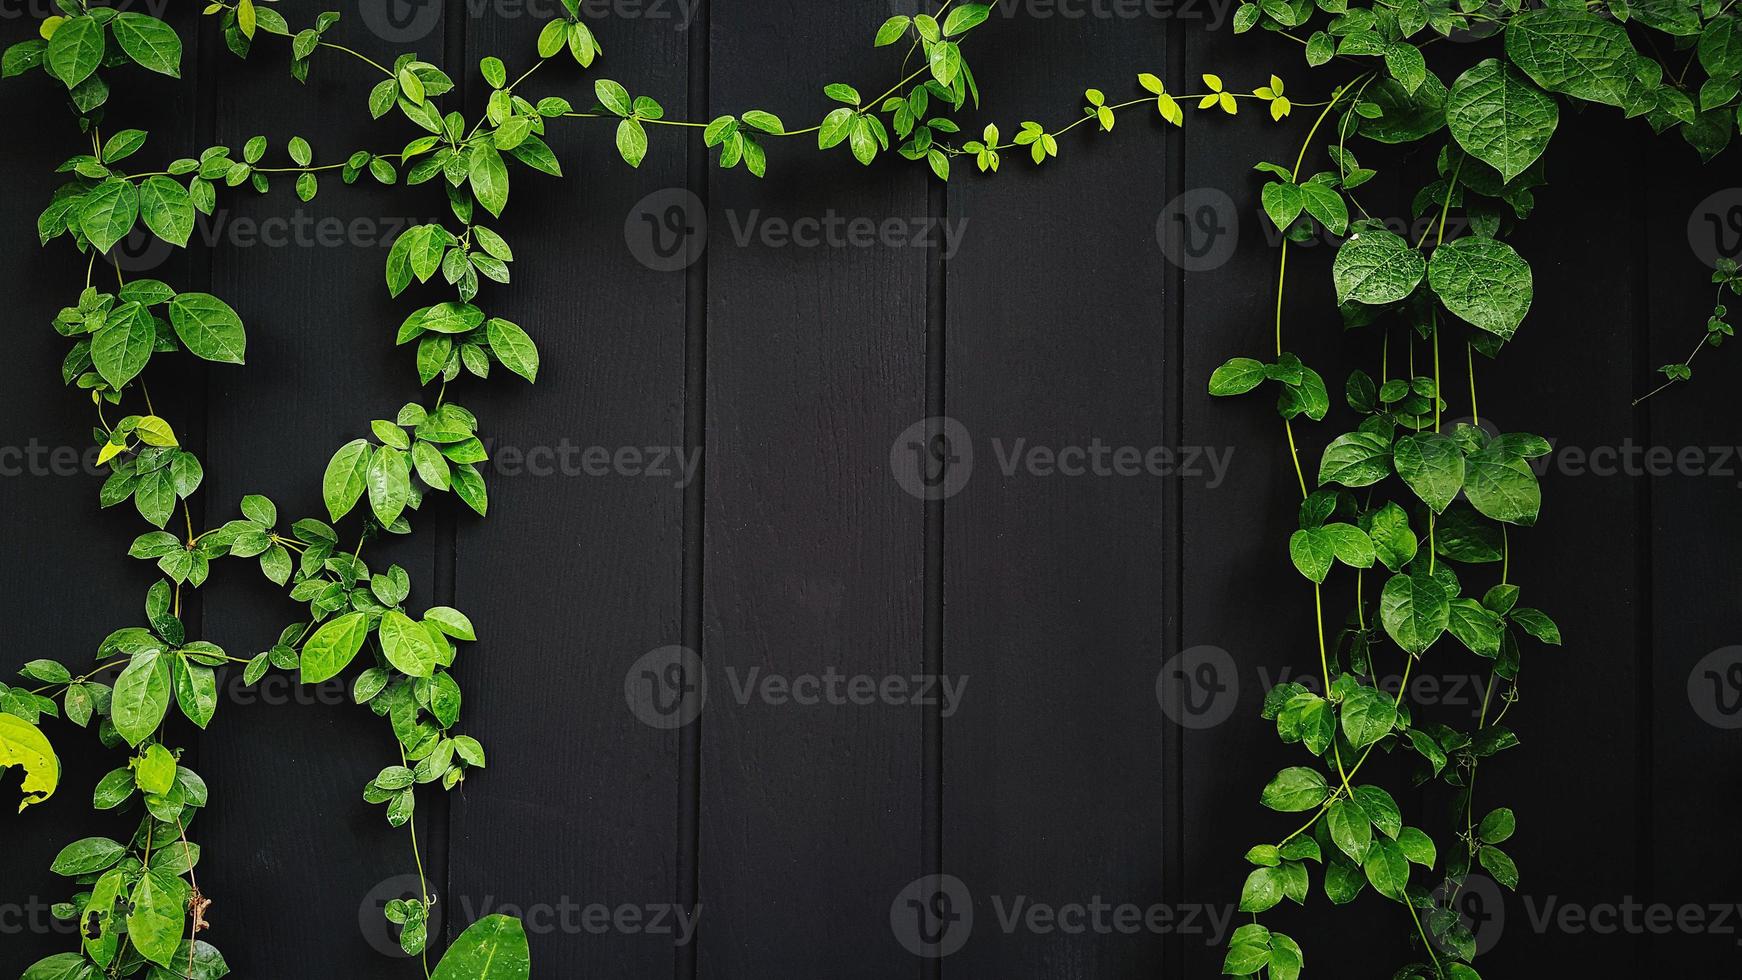 Green Vine, ivy, liana, climber or creeper plant growth on black wooden wall with copy space on center or middle. Beauty in nature and natural design. Leaves on wallpaper or painted wood background. photo